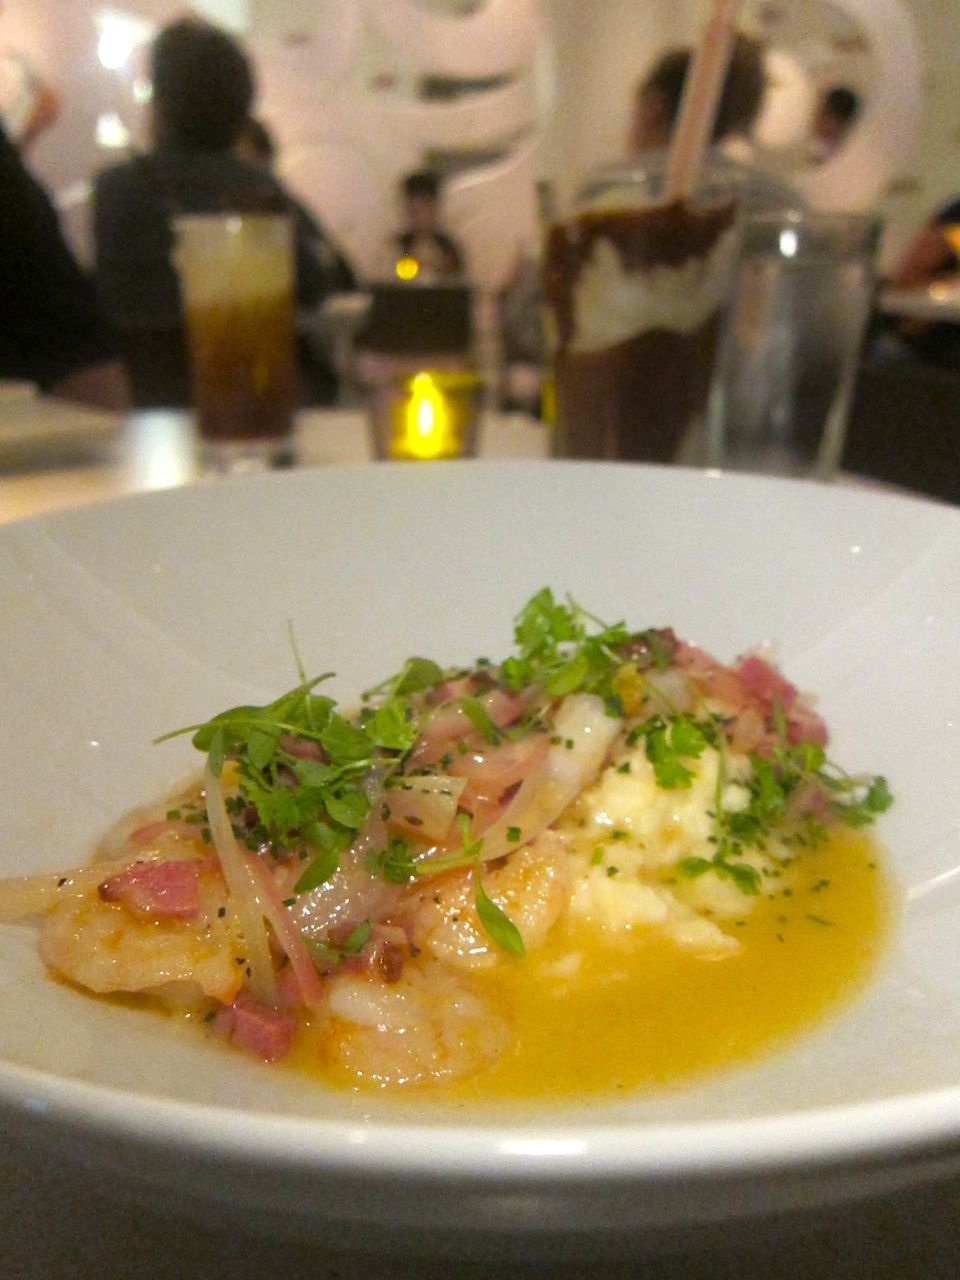 Amazed by the perfection of just-cooked shrimp on grits on an early visit.